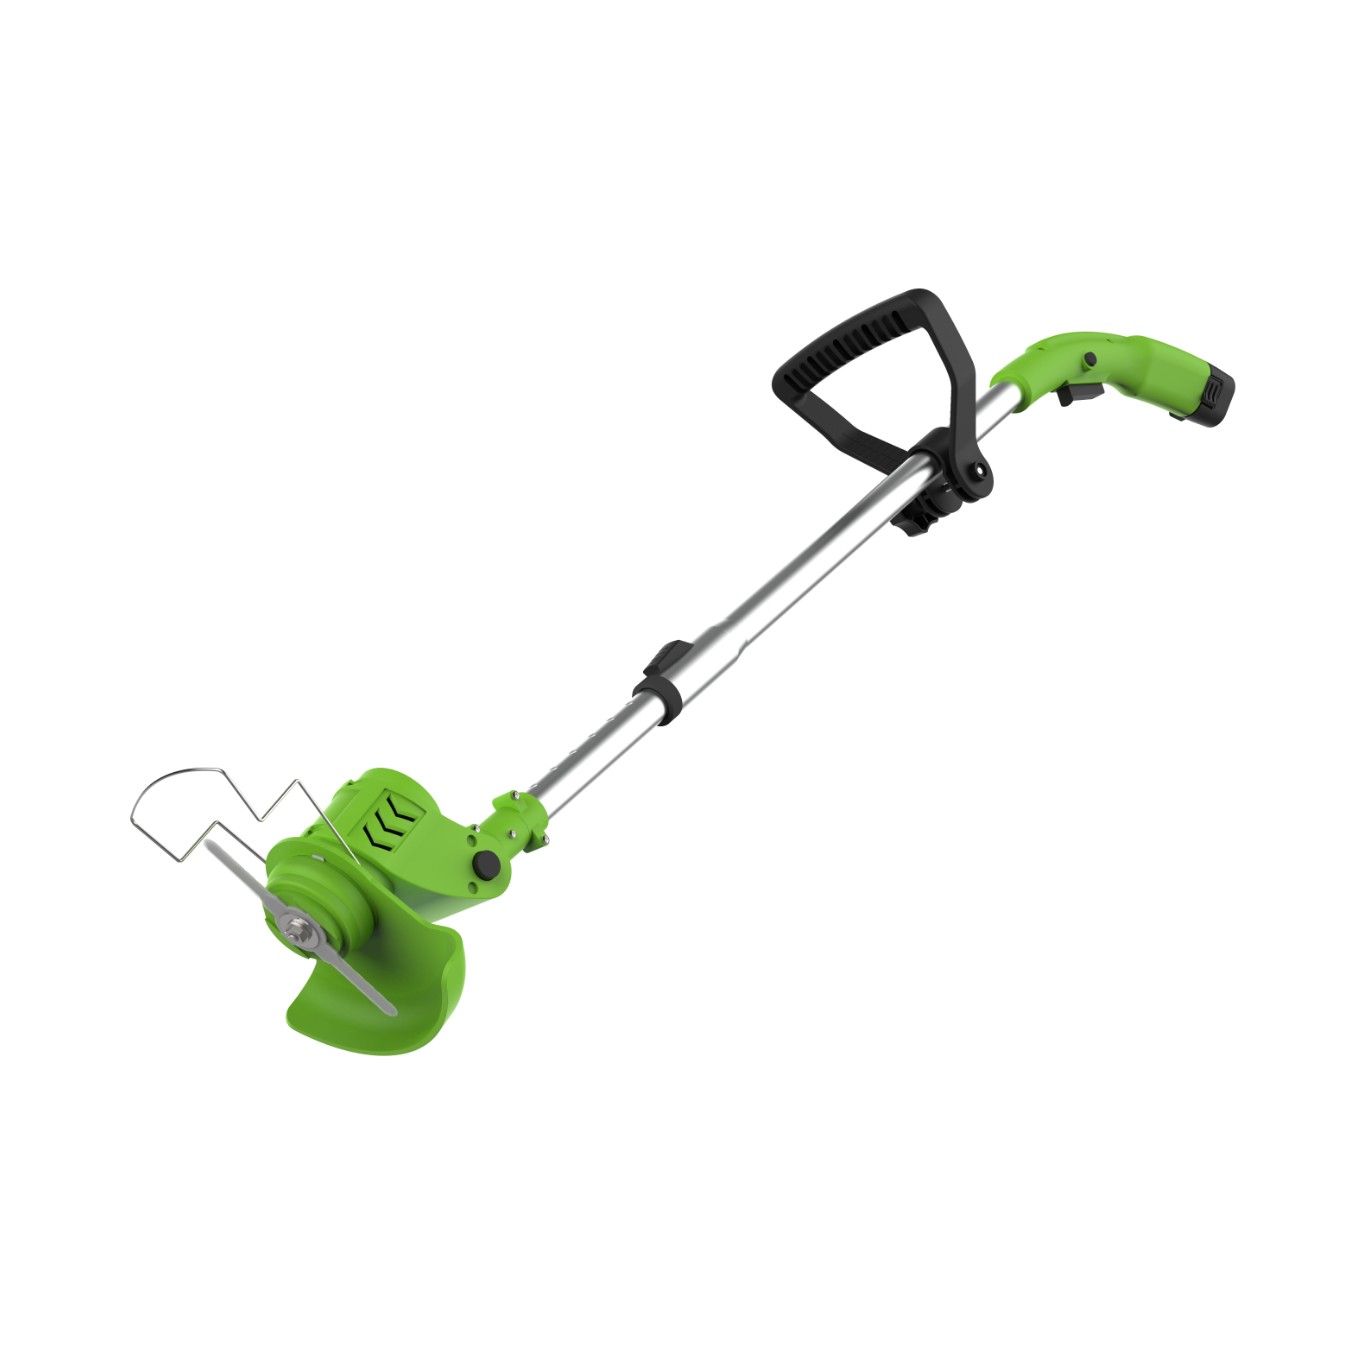 An image of Lawn Barber 2-in-1 Trimmer and Edger